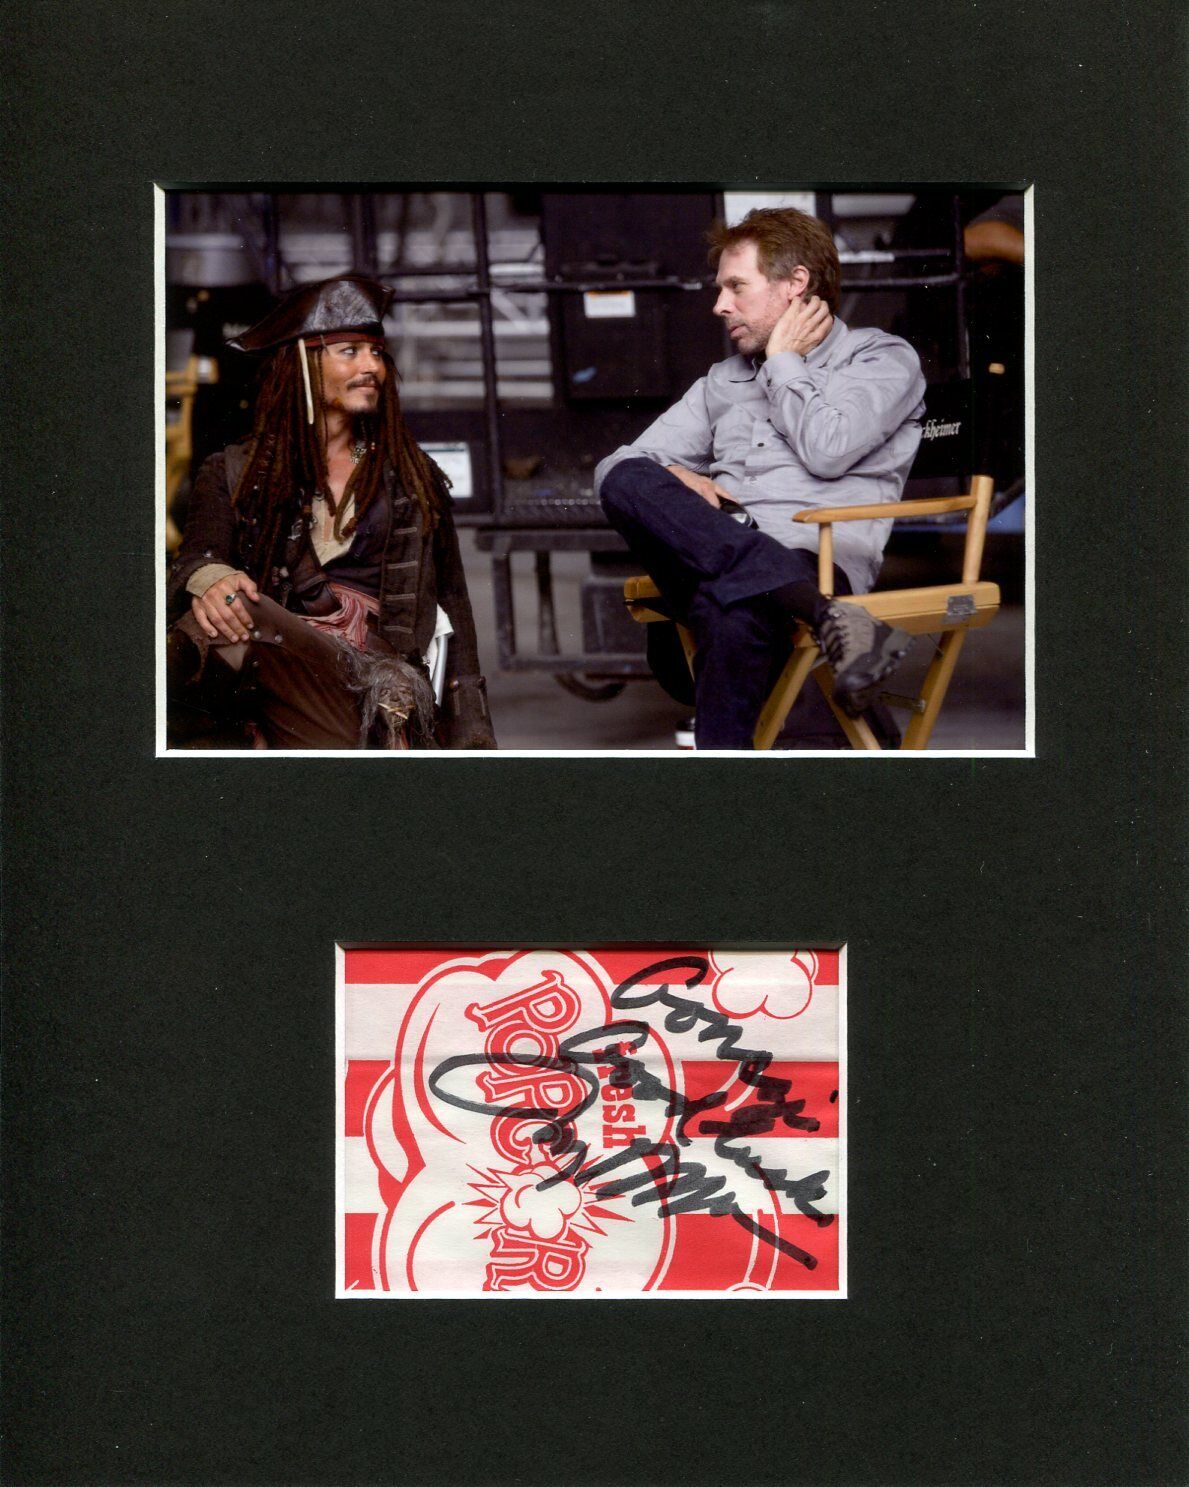 Jerry Bruckheimer Pirates of the Caribbean Signed Photo Display W/ Johnny Depp